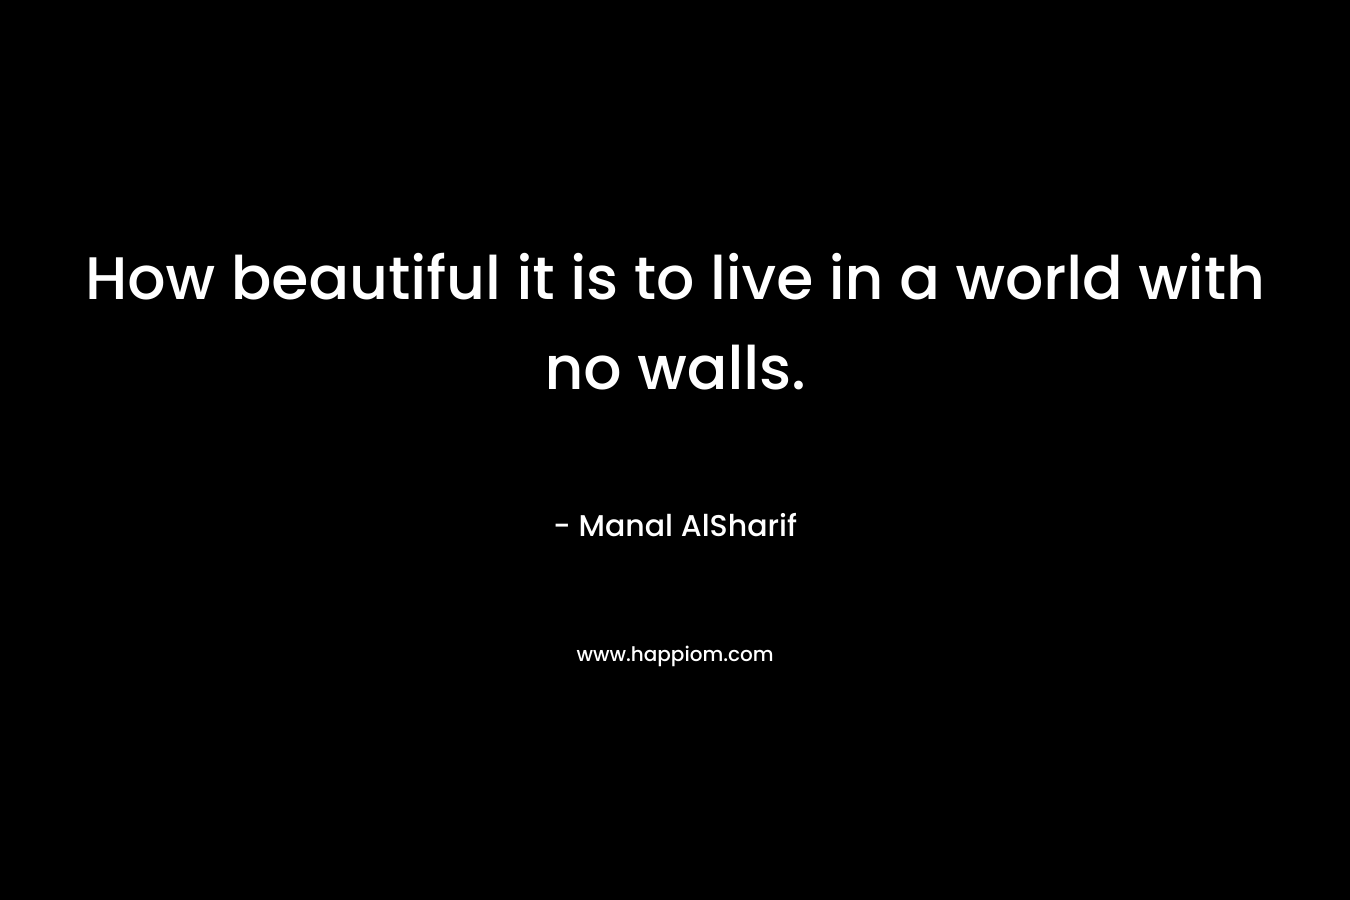 How beautiful it is to live in a world with no walls.